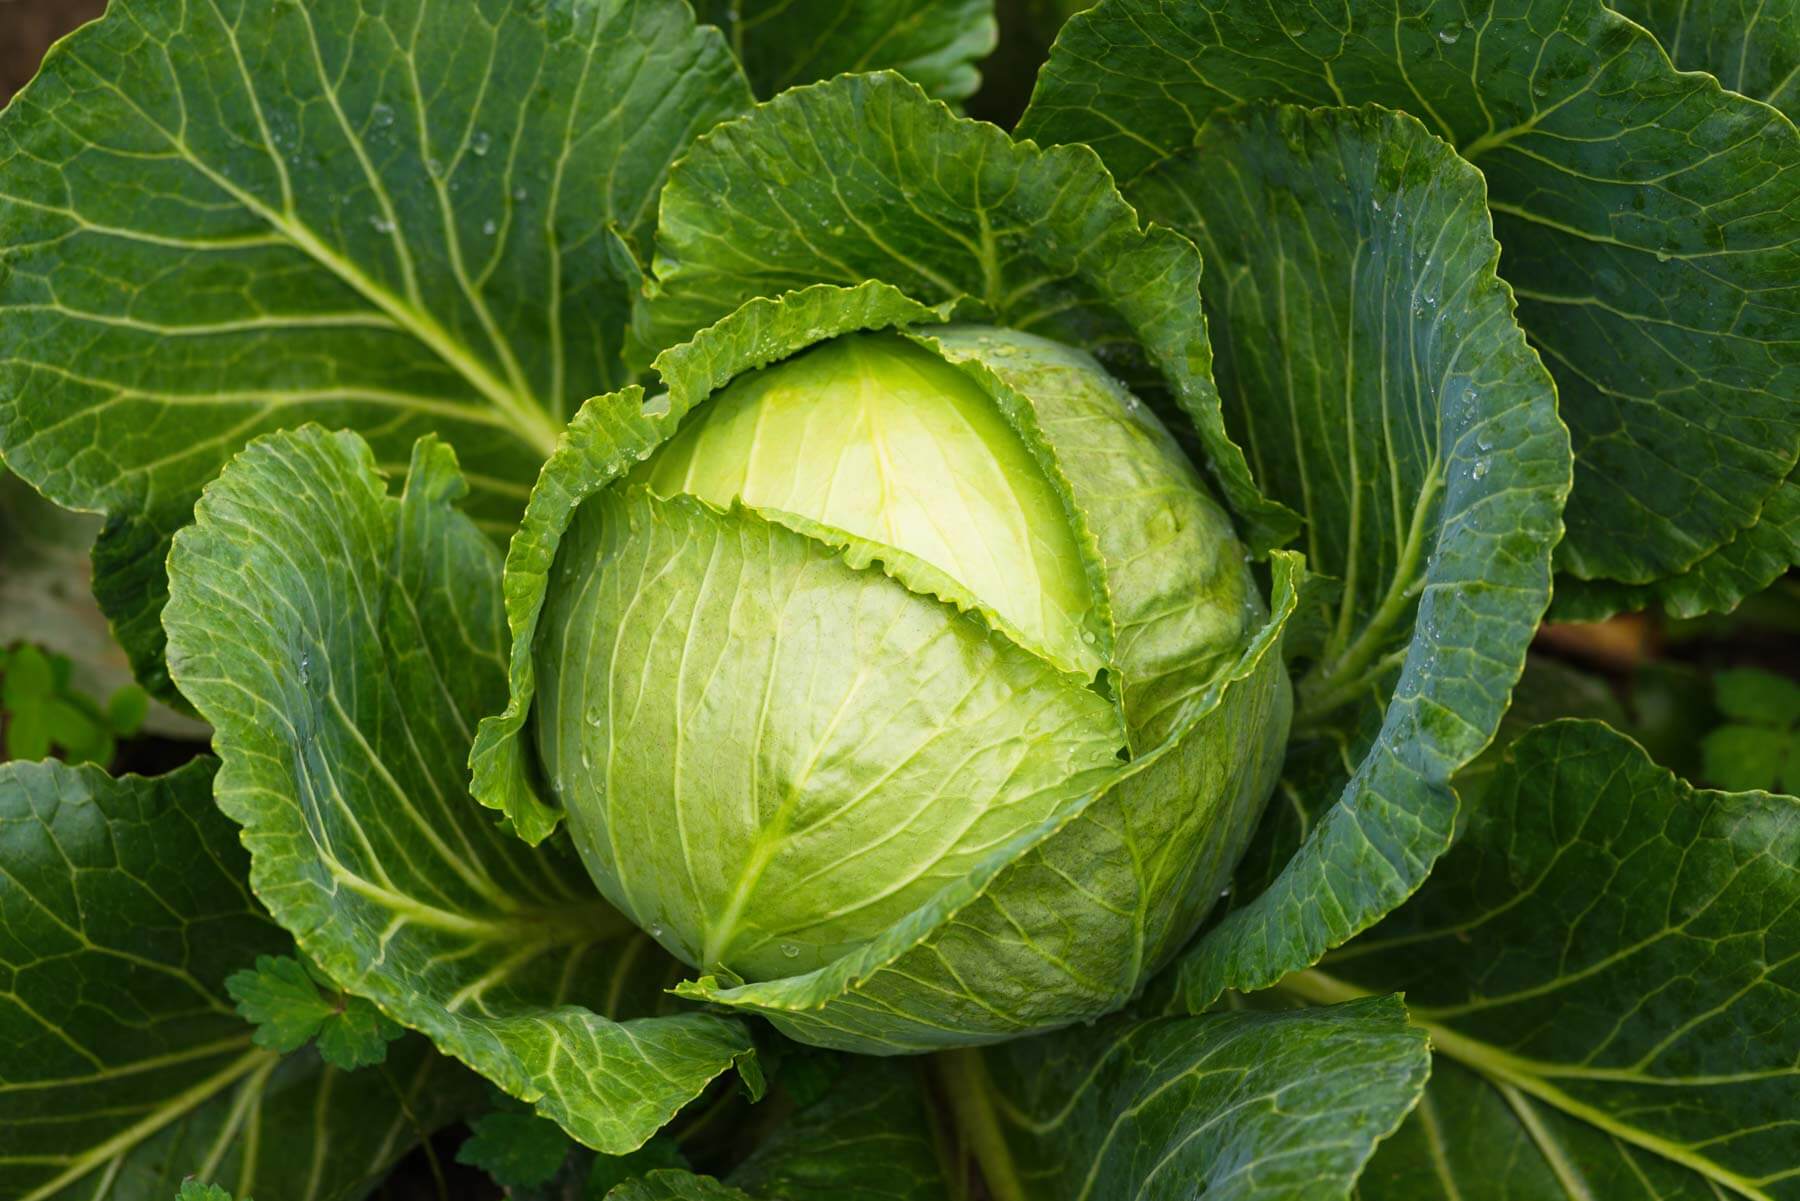 The 6 most cost-effective vegetables to grow in your garden